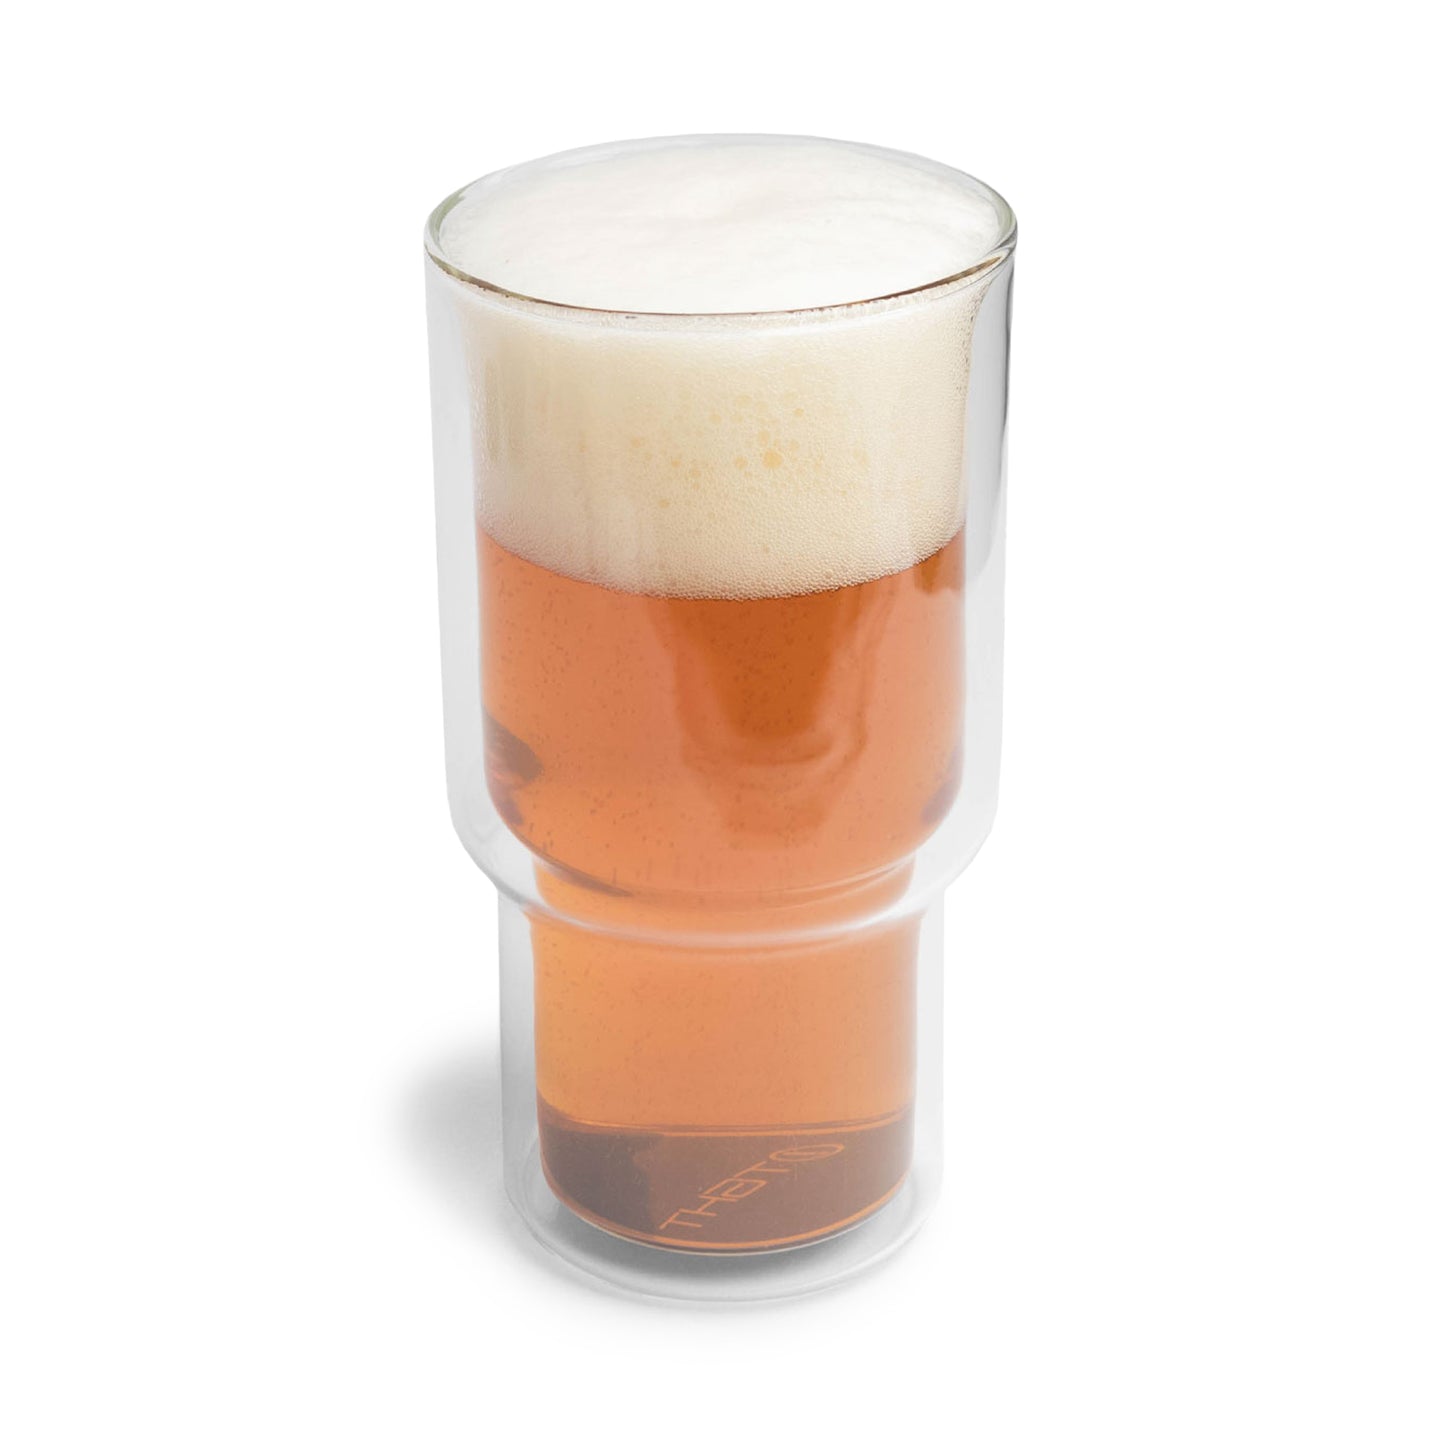 Double Walled Beer Glasses